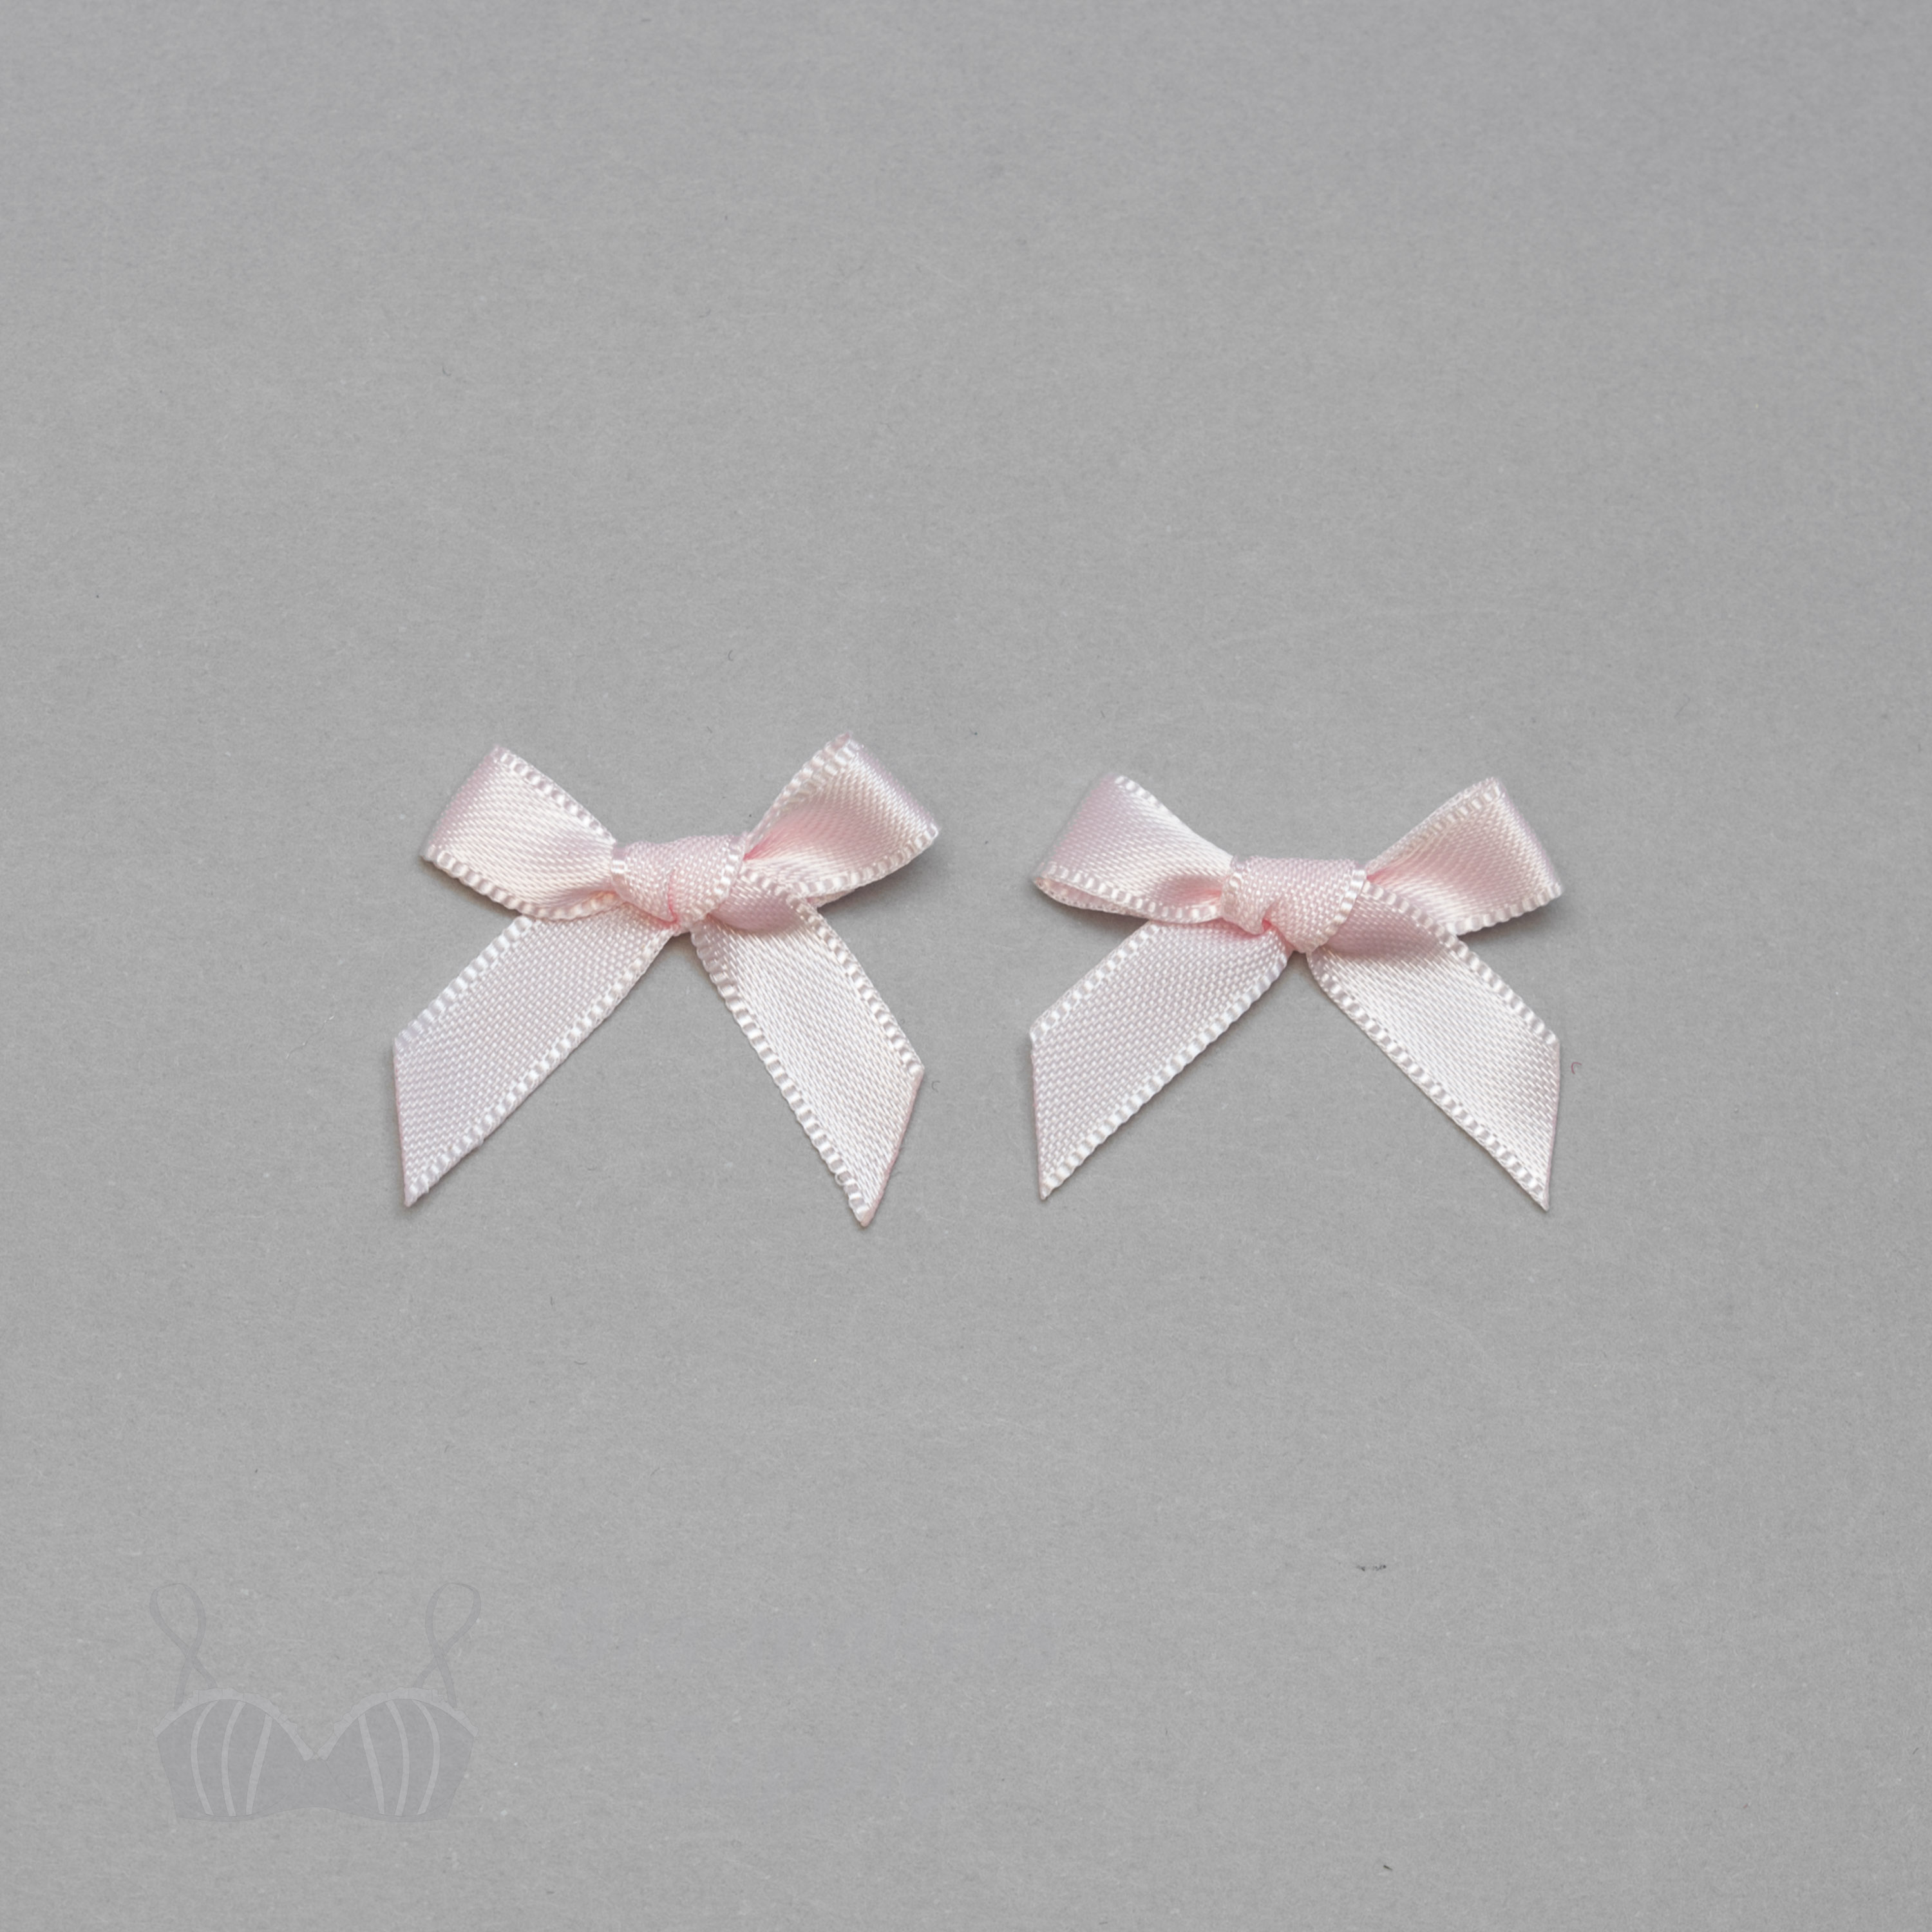 Decorative Bra Bows - add the finishing touch - Bra-Makers Supply